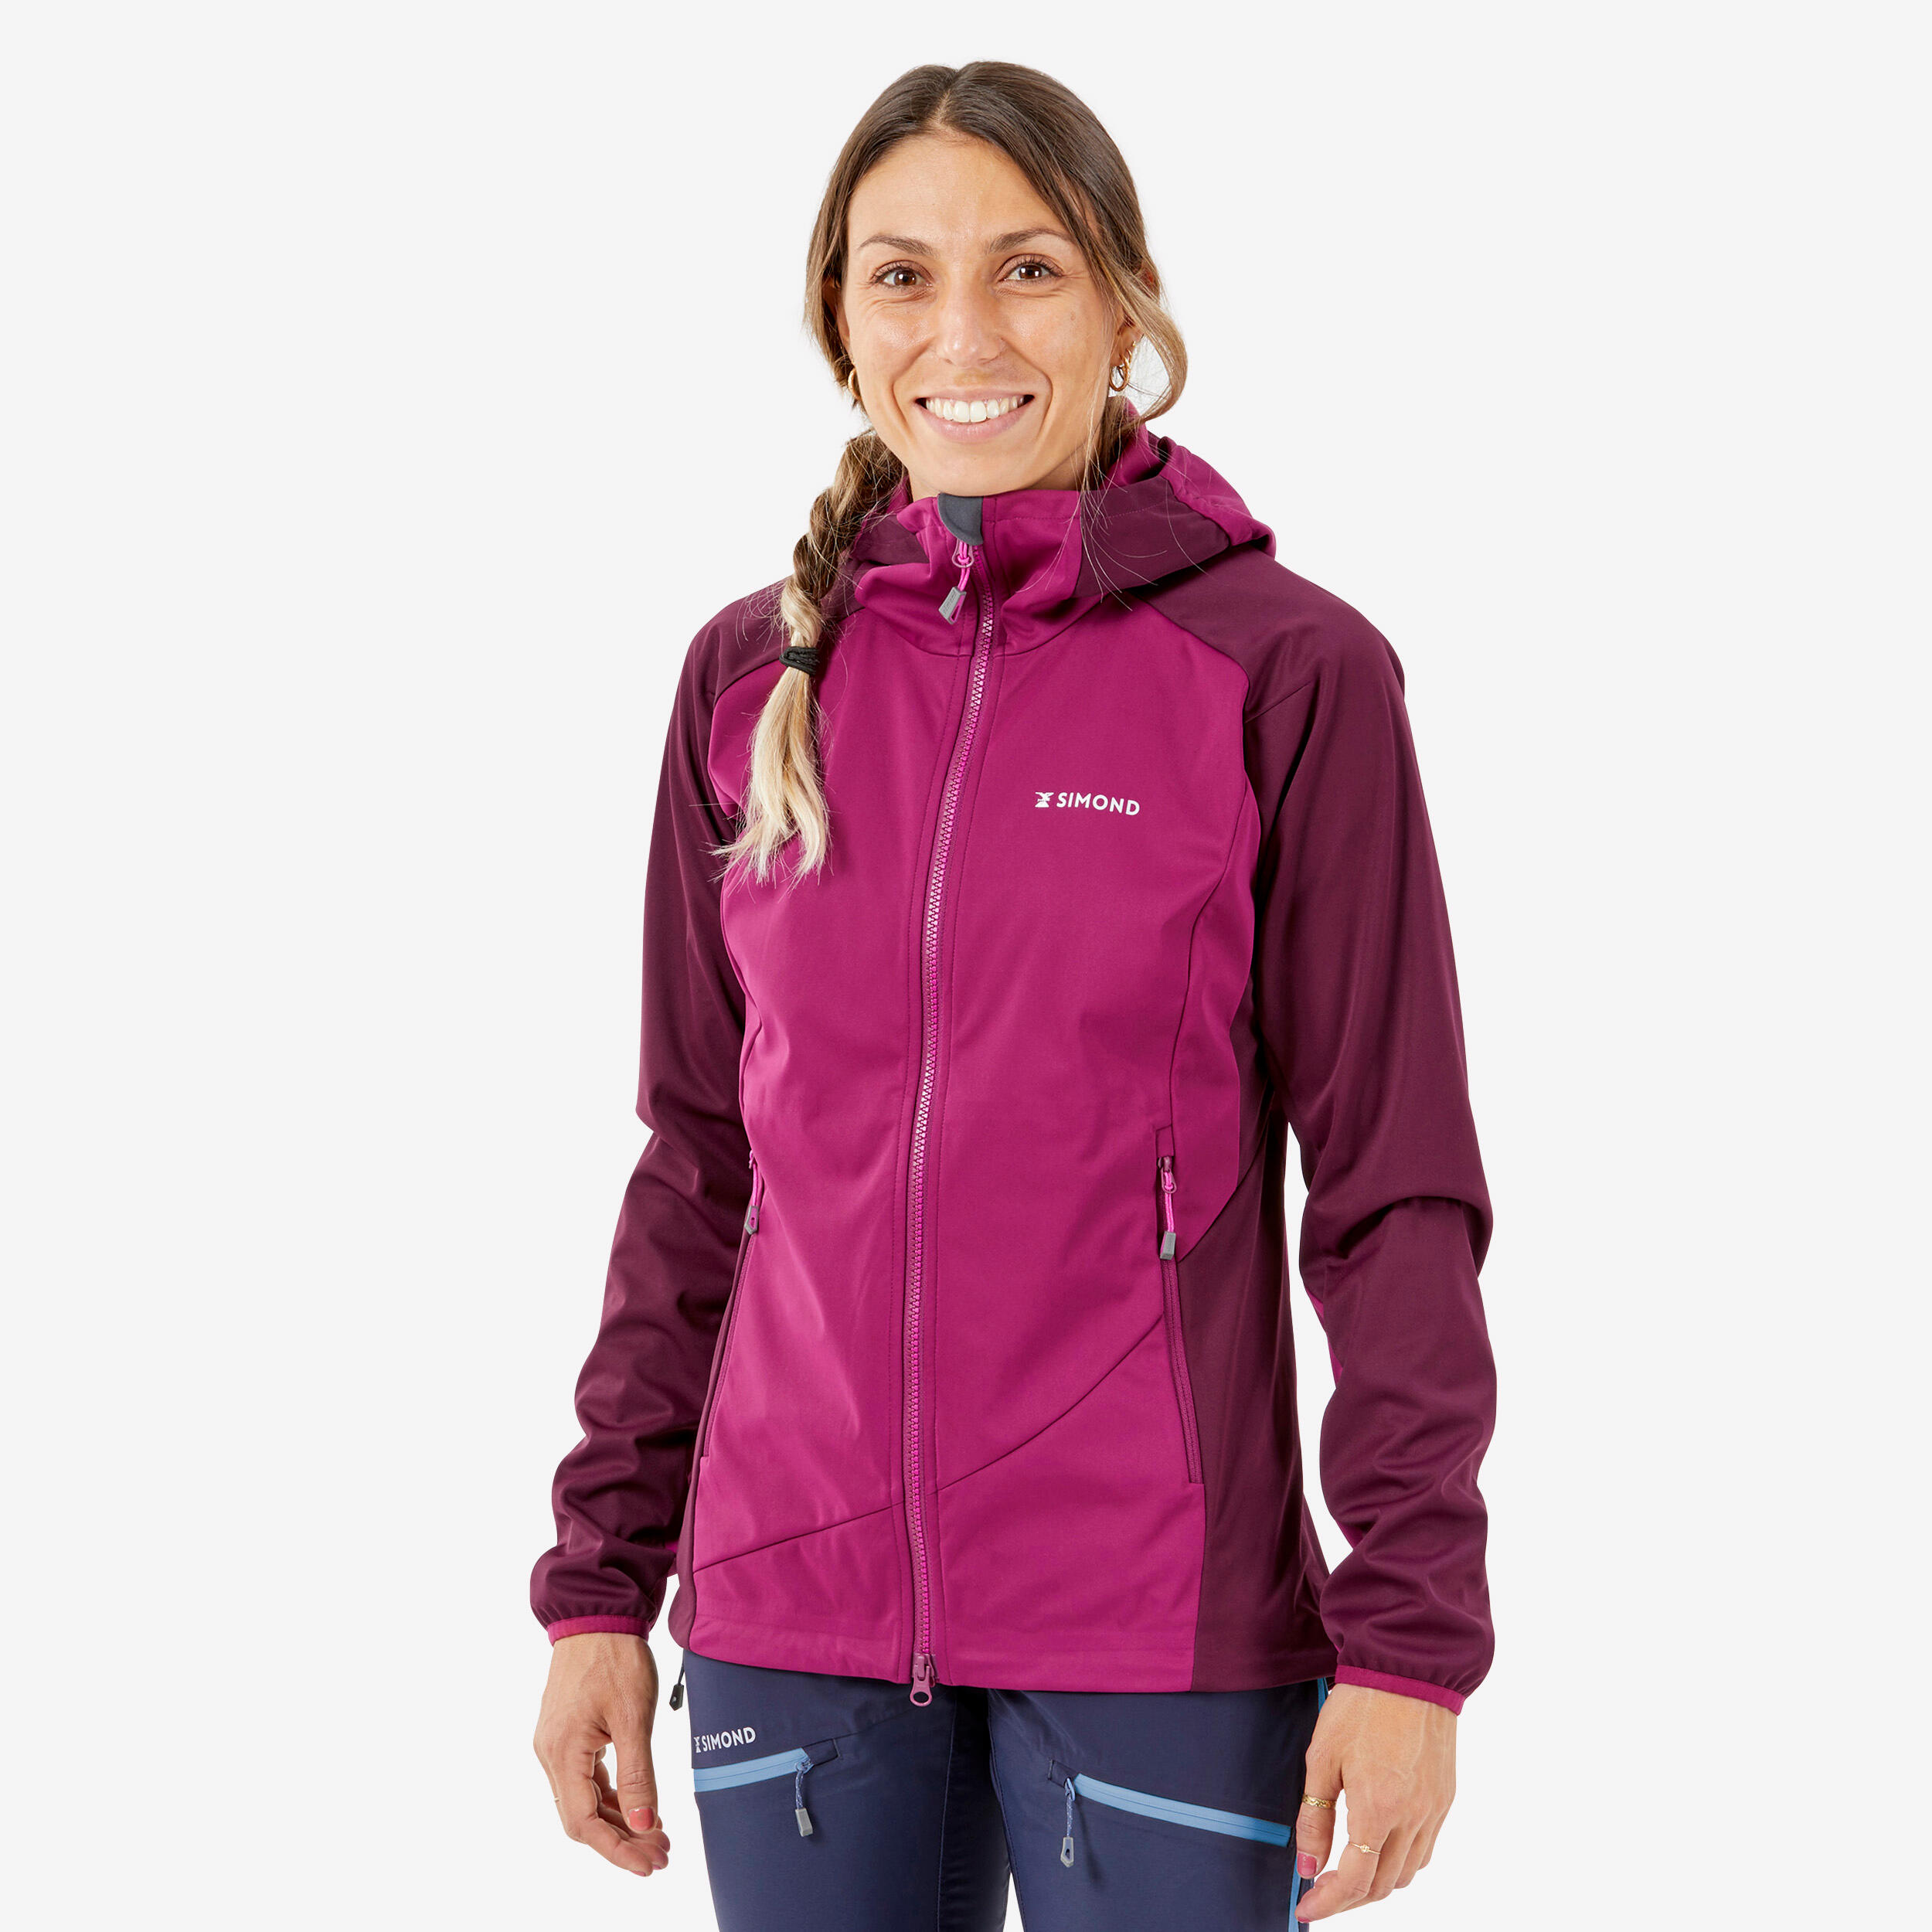 Ladies Heated Jacket, Waterproof, Windproof, Warm Softshell Winter Jacket  for Cold Outdoor Activities, Skiing, Fishing, Hunting (Color : Pink, Size 